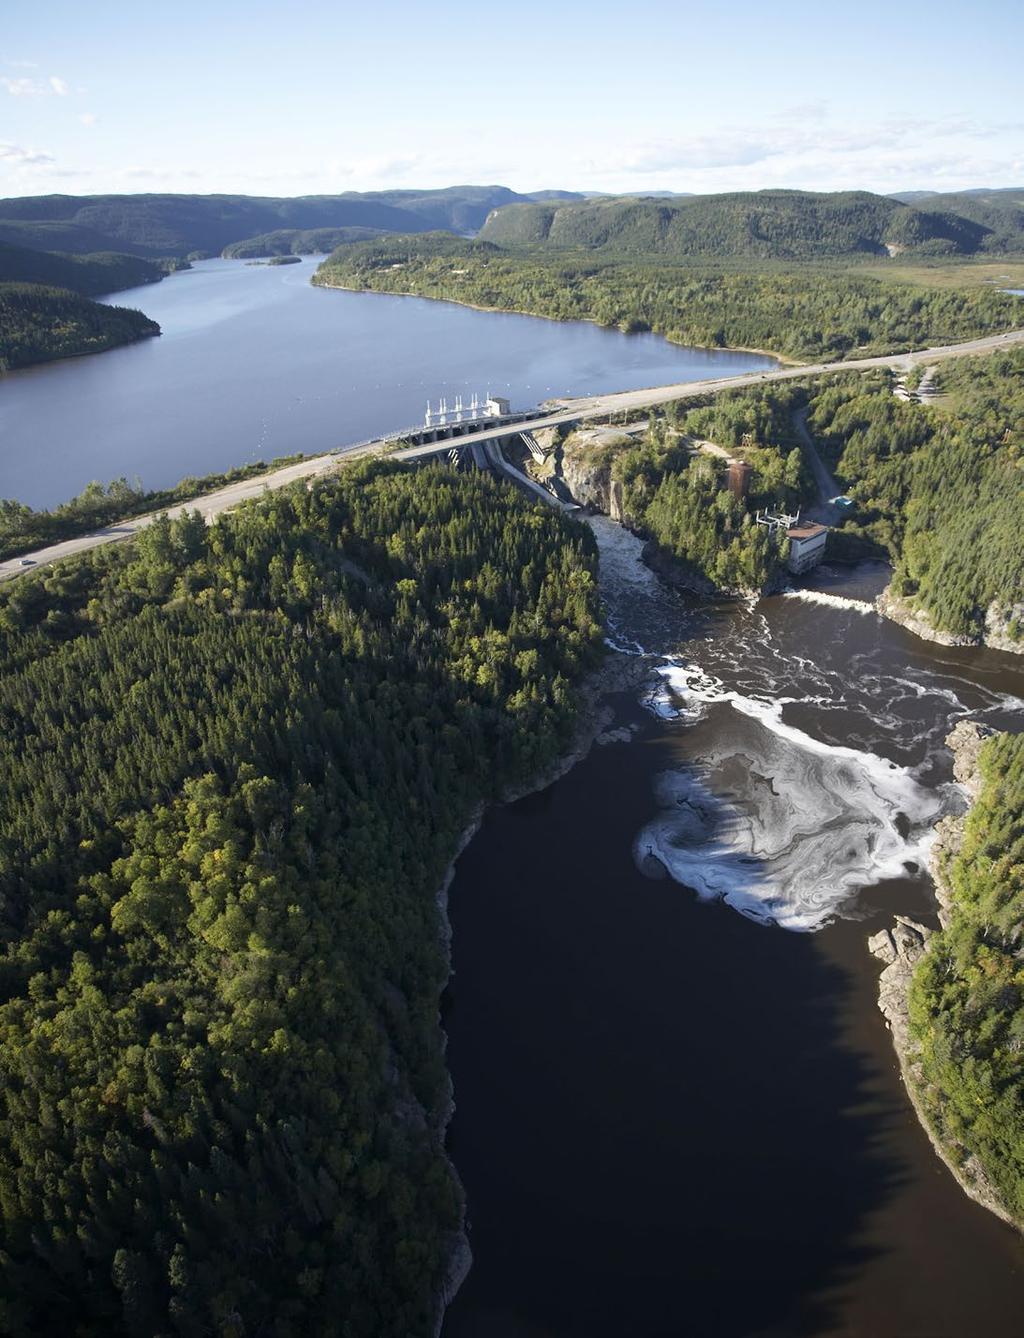 Global Reporting Initiative Index Image: The Sept-Iles power plant supplies power to the town of Sept-Iles